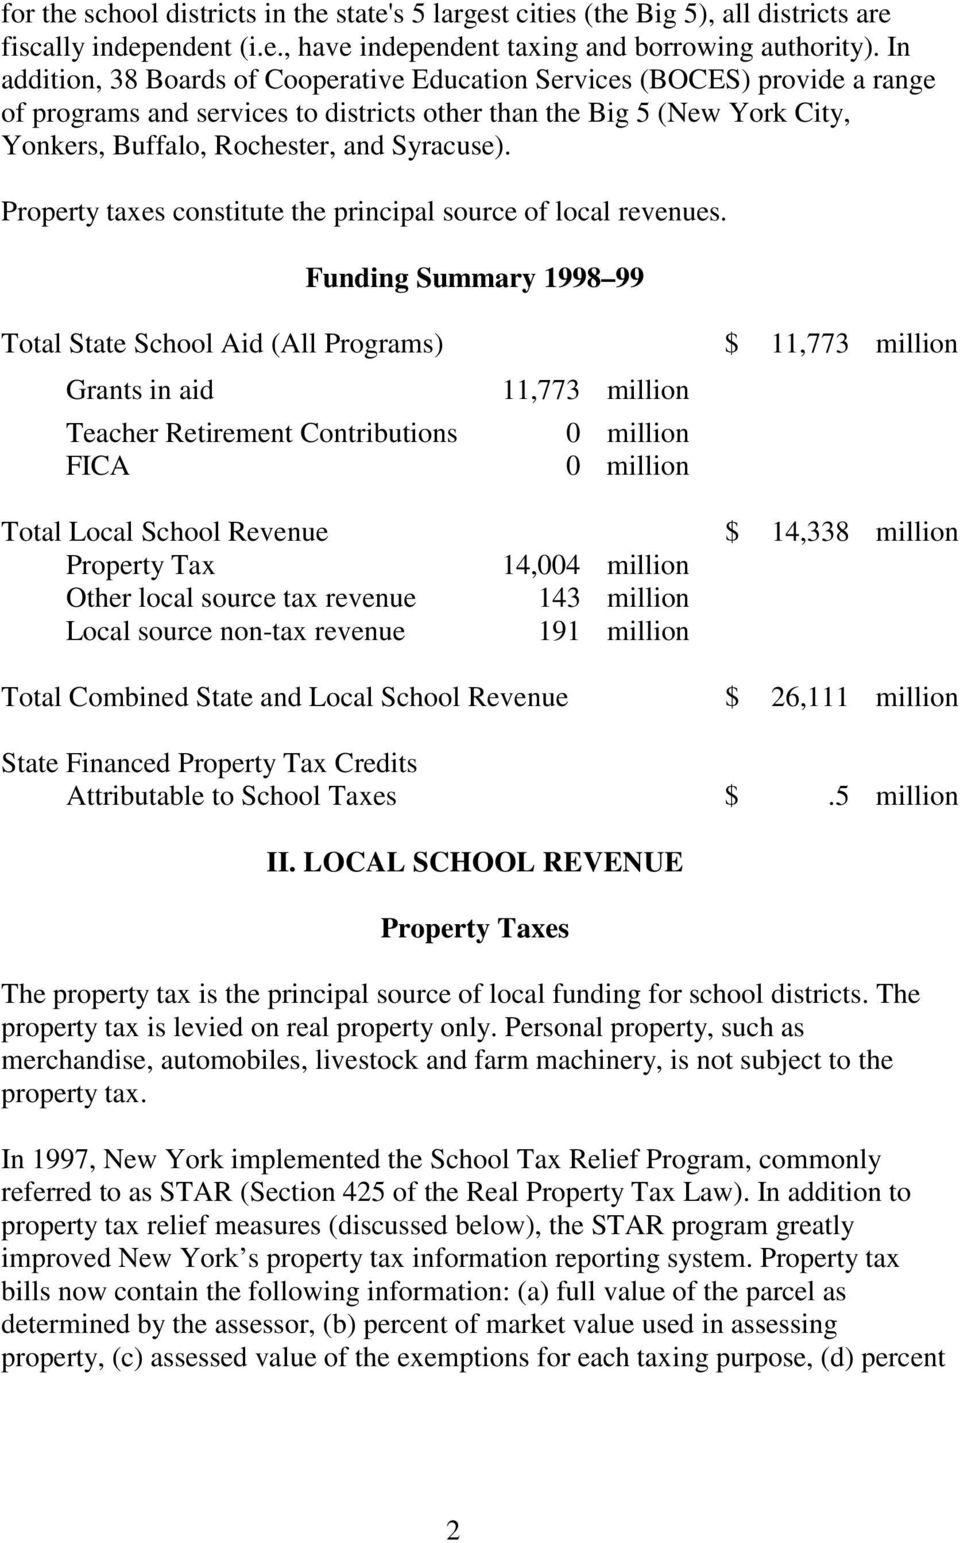 Property taxes constitute the principal source of local revenues.